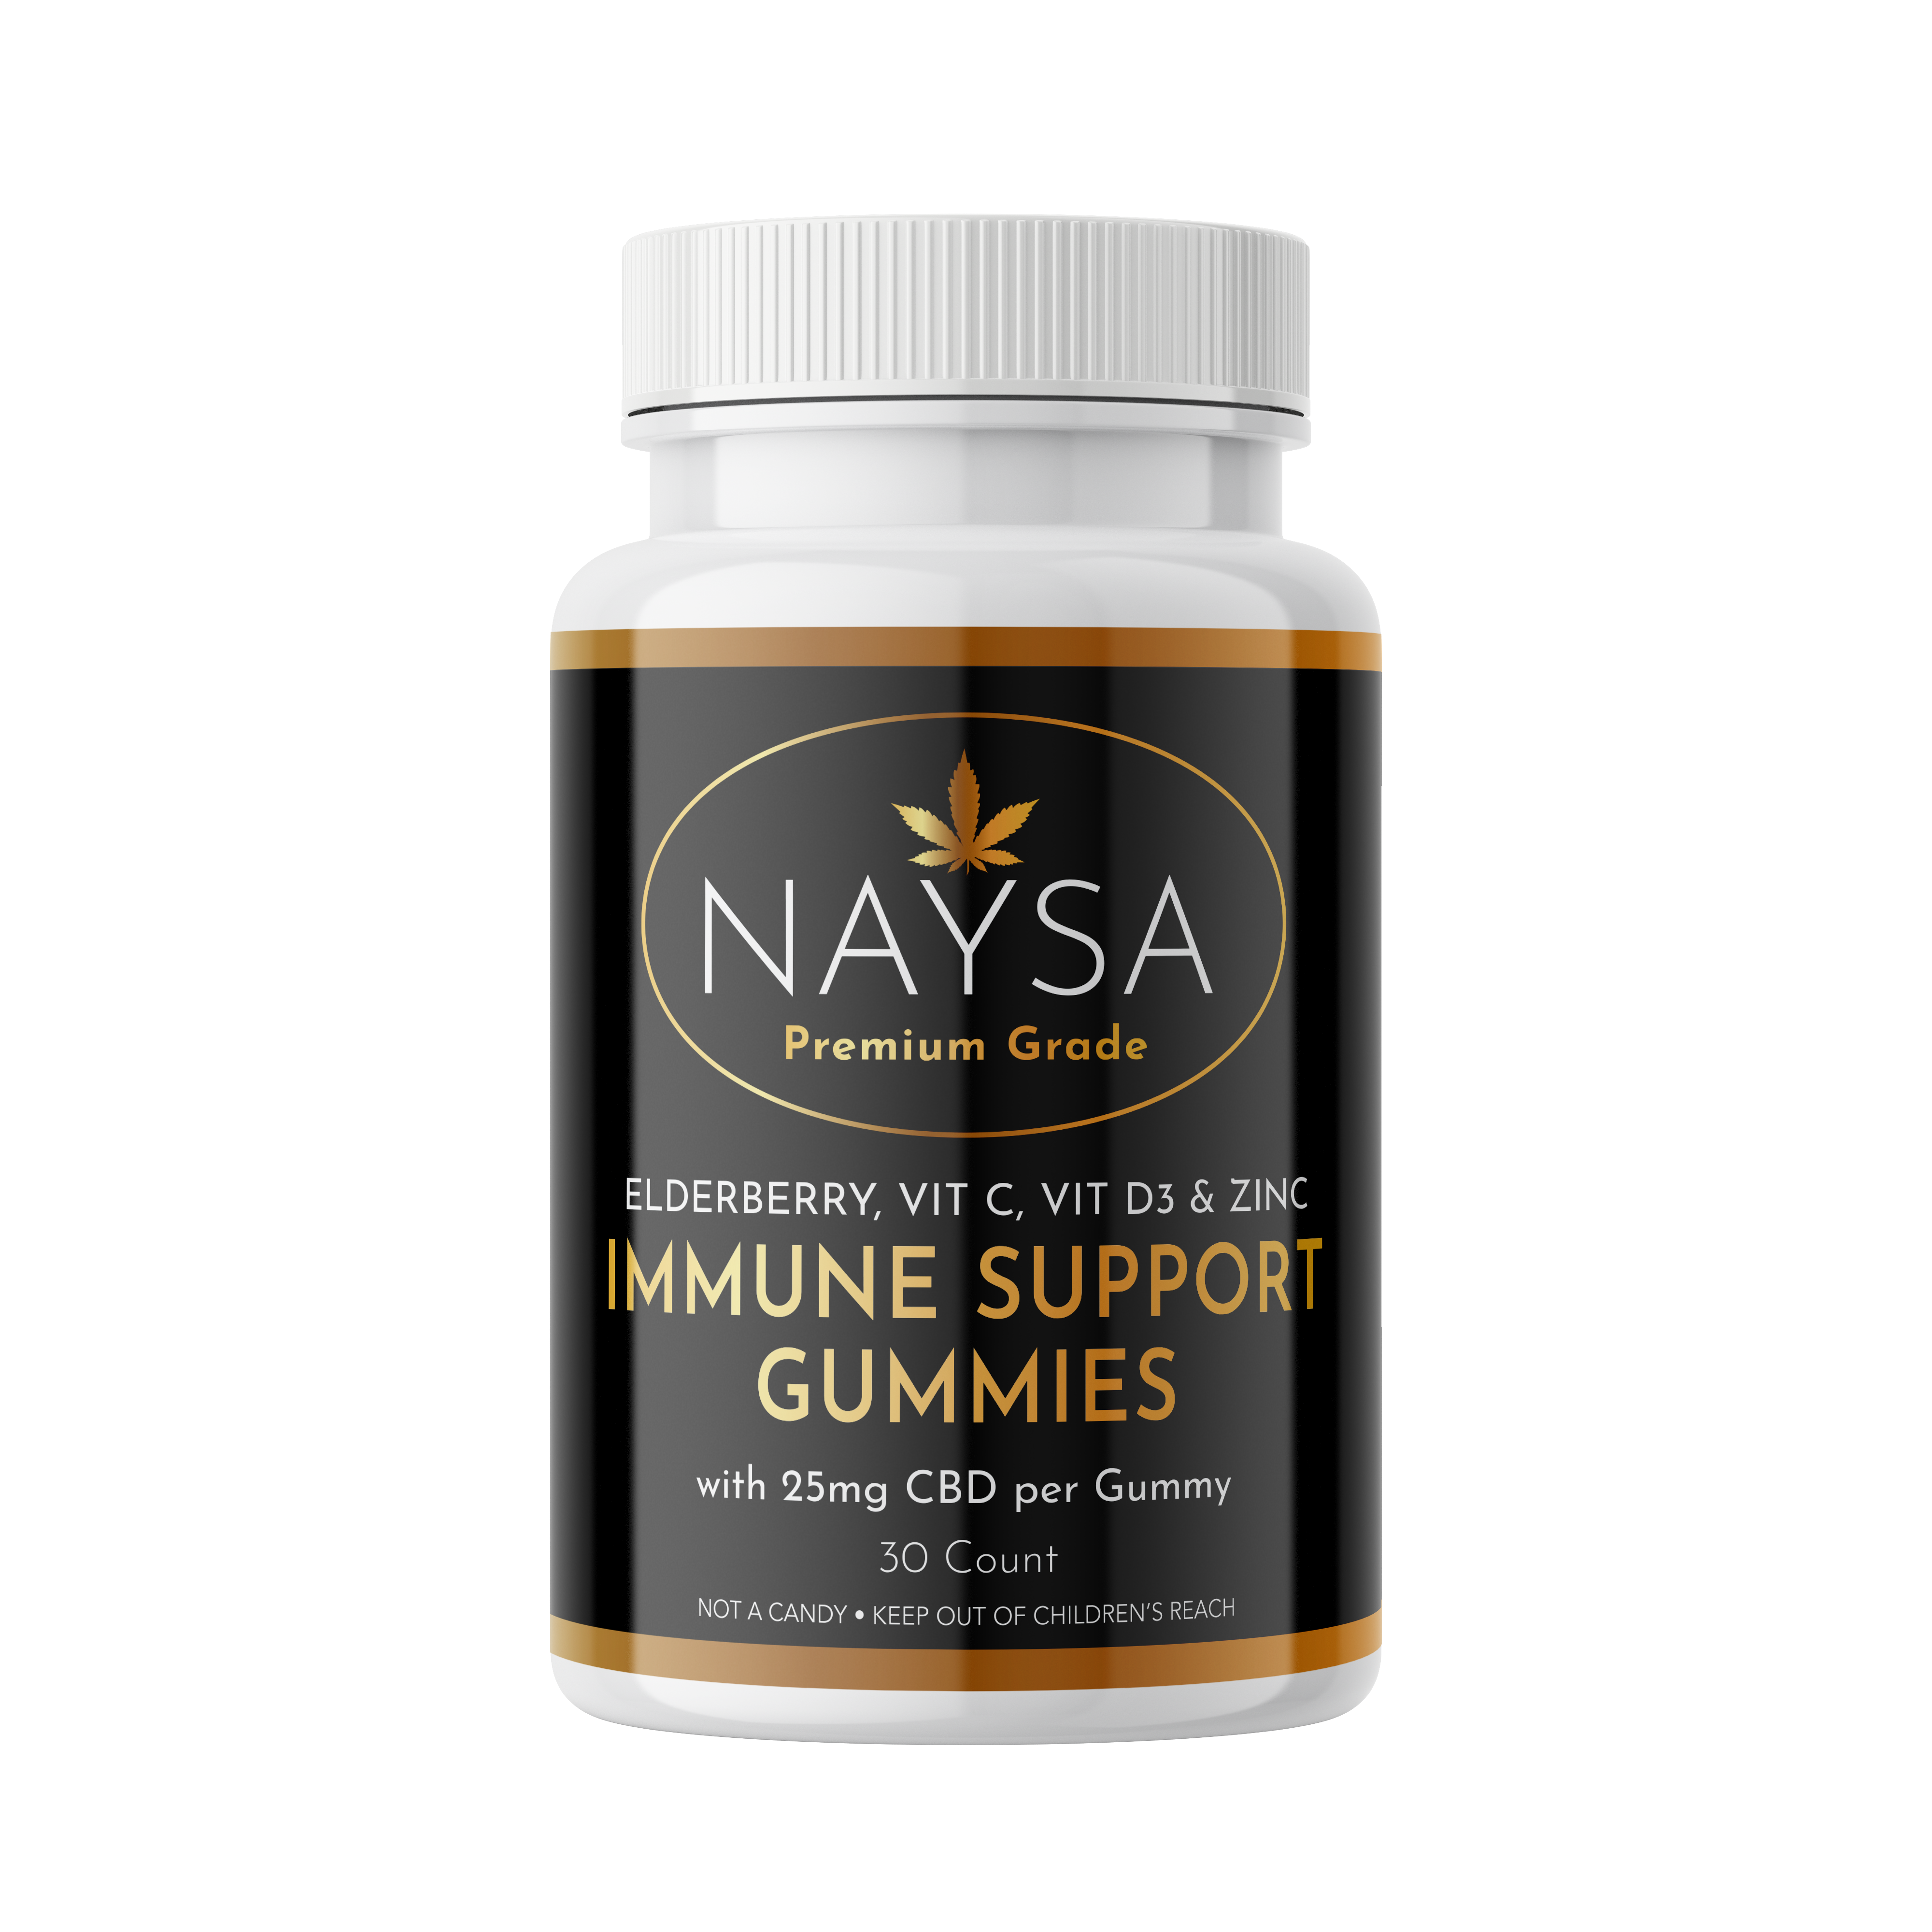 Immune Support Gummies with 25mg CBD